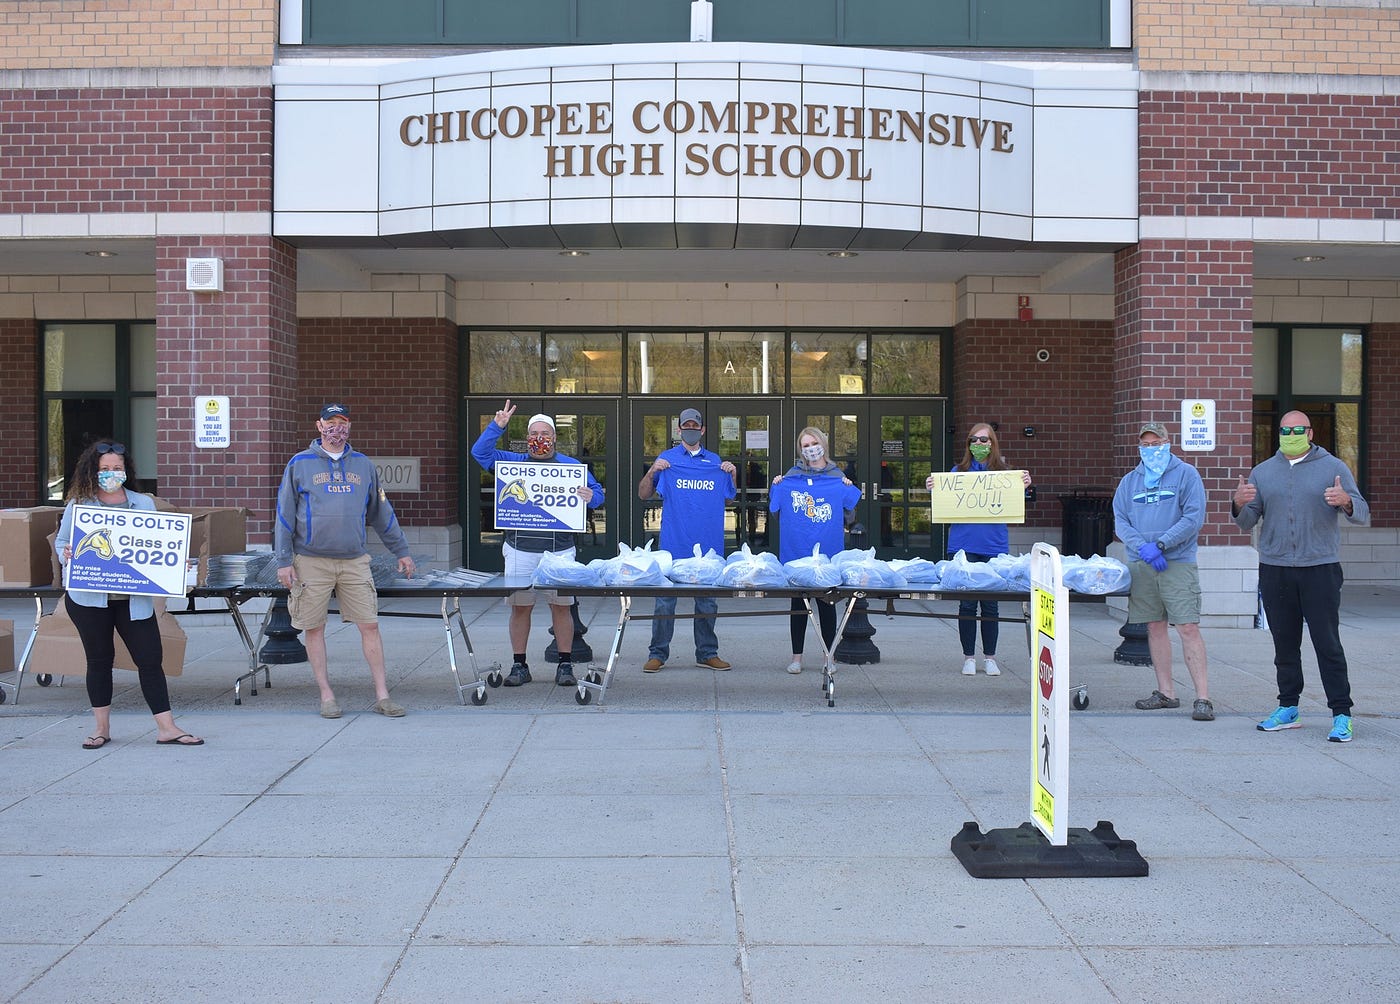 Chicopee High School principal reports a successful first month with Yondr  pouches